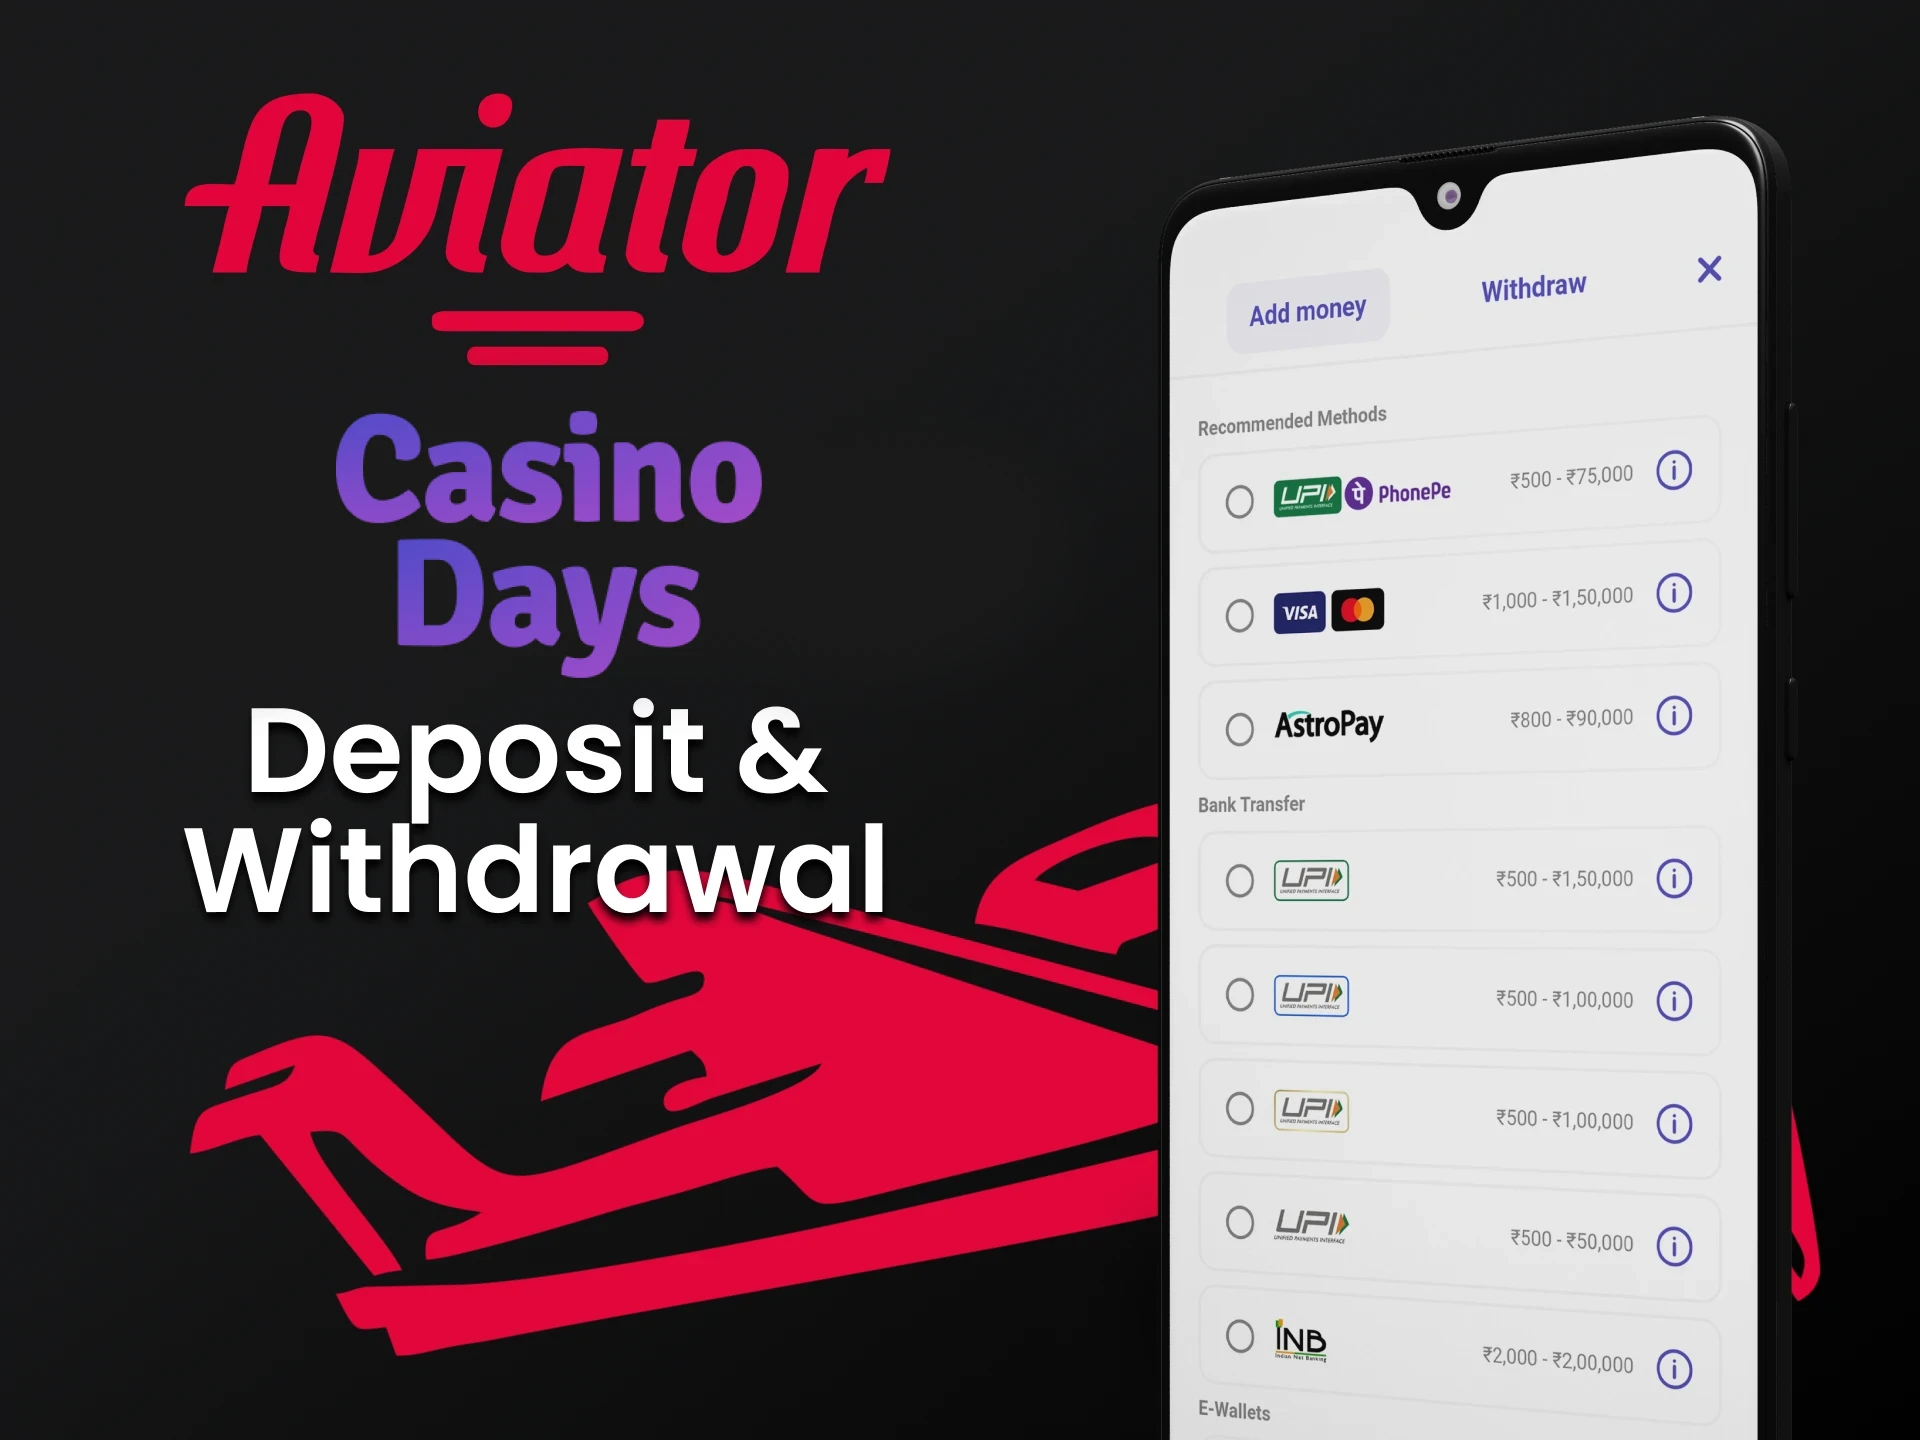 Find out how to deposit and withdraw funds for the Aviator in the Casino Days app.